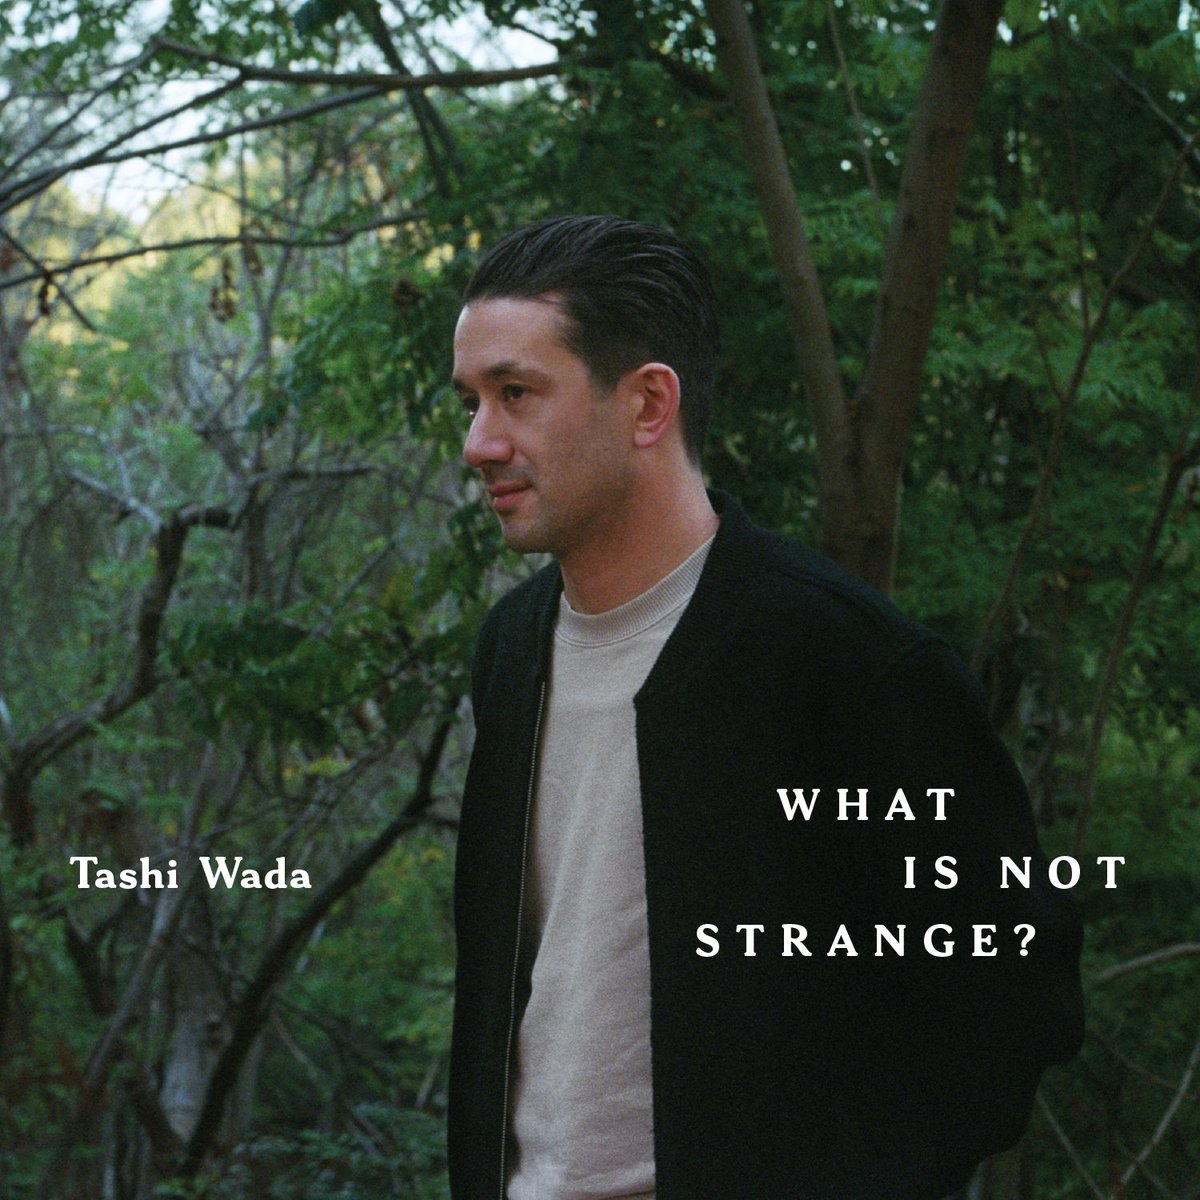 new @tashiwada album “What Is Not Strange?” comes out June 7 on @rvngintl I had so much fun singing and playing on this wild beautiful record w Tashi + friends Dev Hoff, Corey Fogel, Ezra Buchla + Chris Cohen. it sounds like nothing I’ve known before lnk.to/rvngnl114Tashi